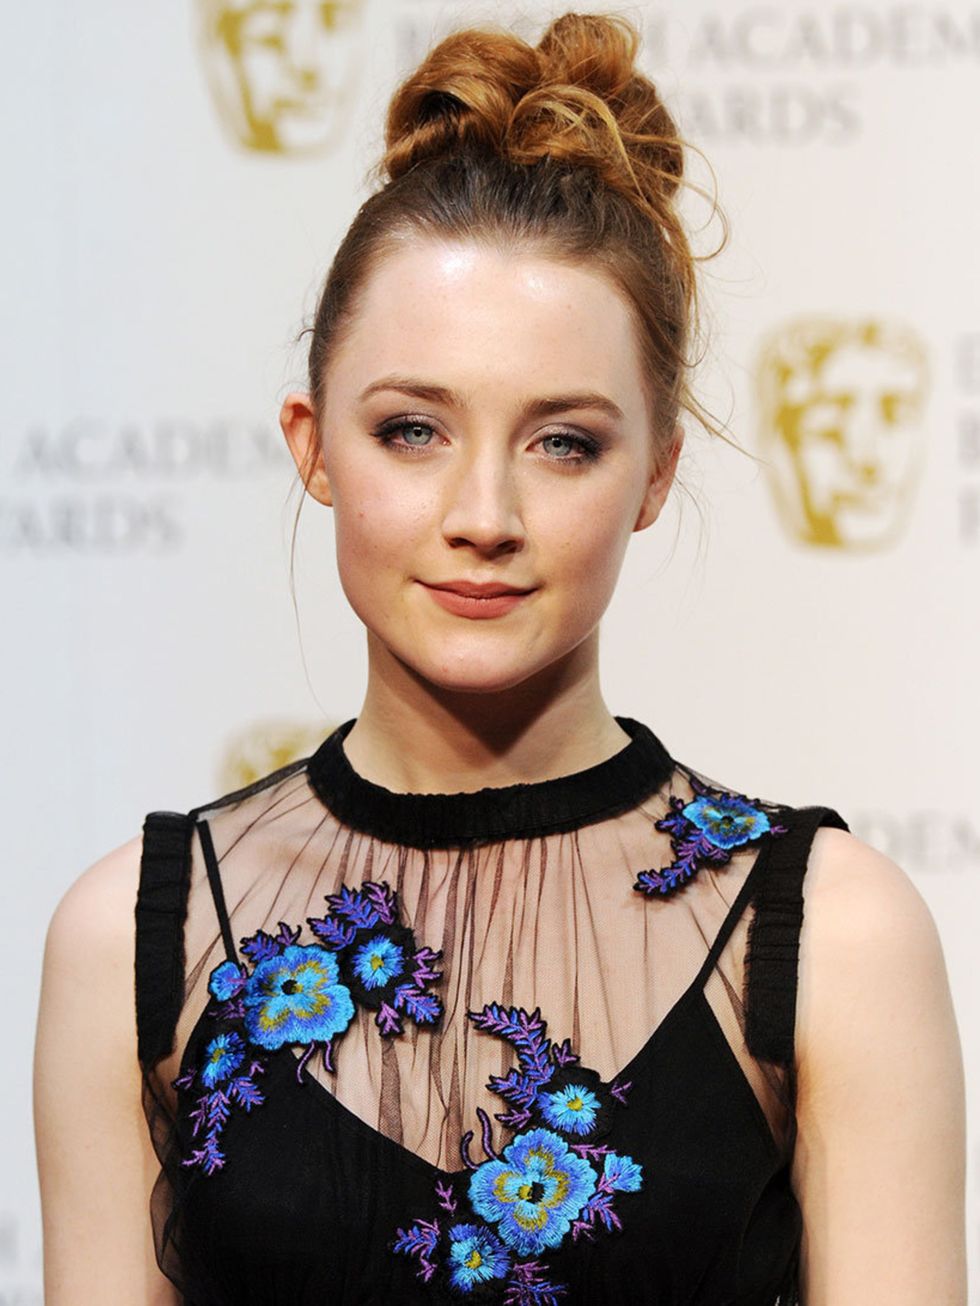 <p><strong>Saoirse Ronan</strong>The 19-year-old actress has made a name for herself in films like The Lovely Bones and Atonement, and is currently wowing in <a href="http://www.elleuk.com/star-style/news/elle-reviews-grand-budapest-hotel-wes-anderson-ral